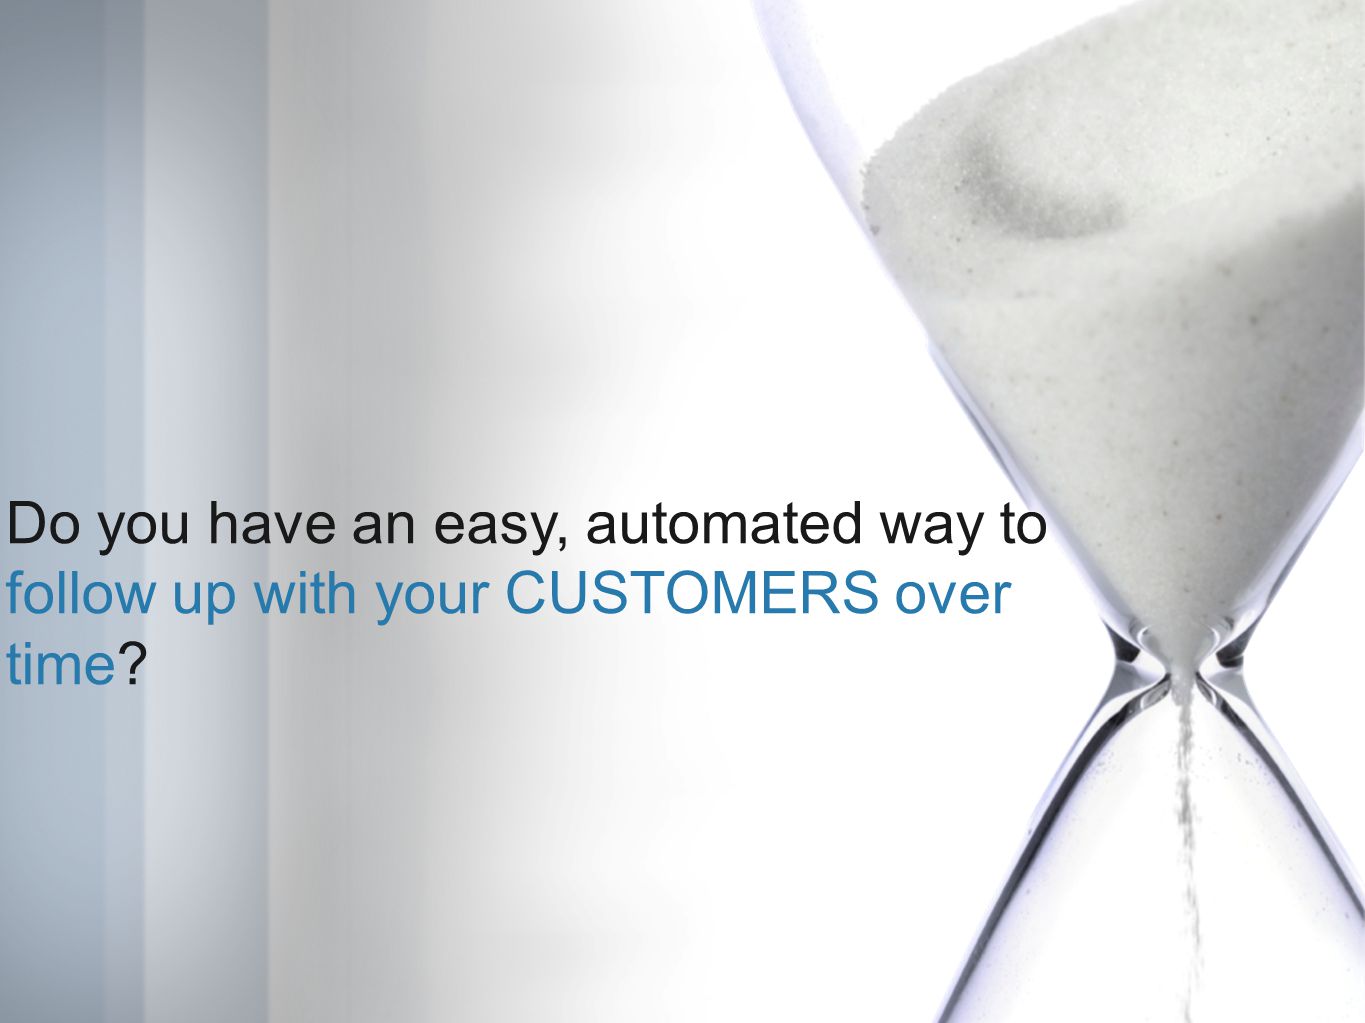 Do you have an easy, automated way to follow up with your CUSTOMERS over time